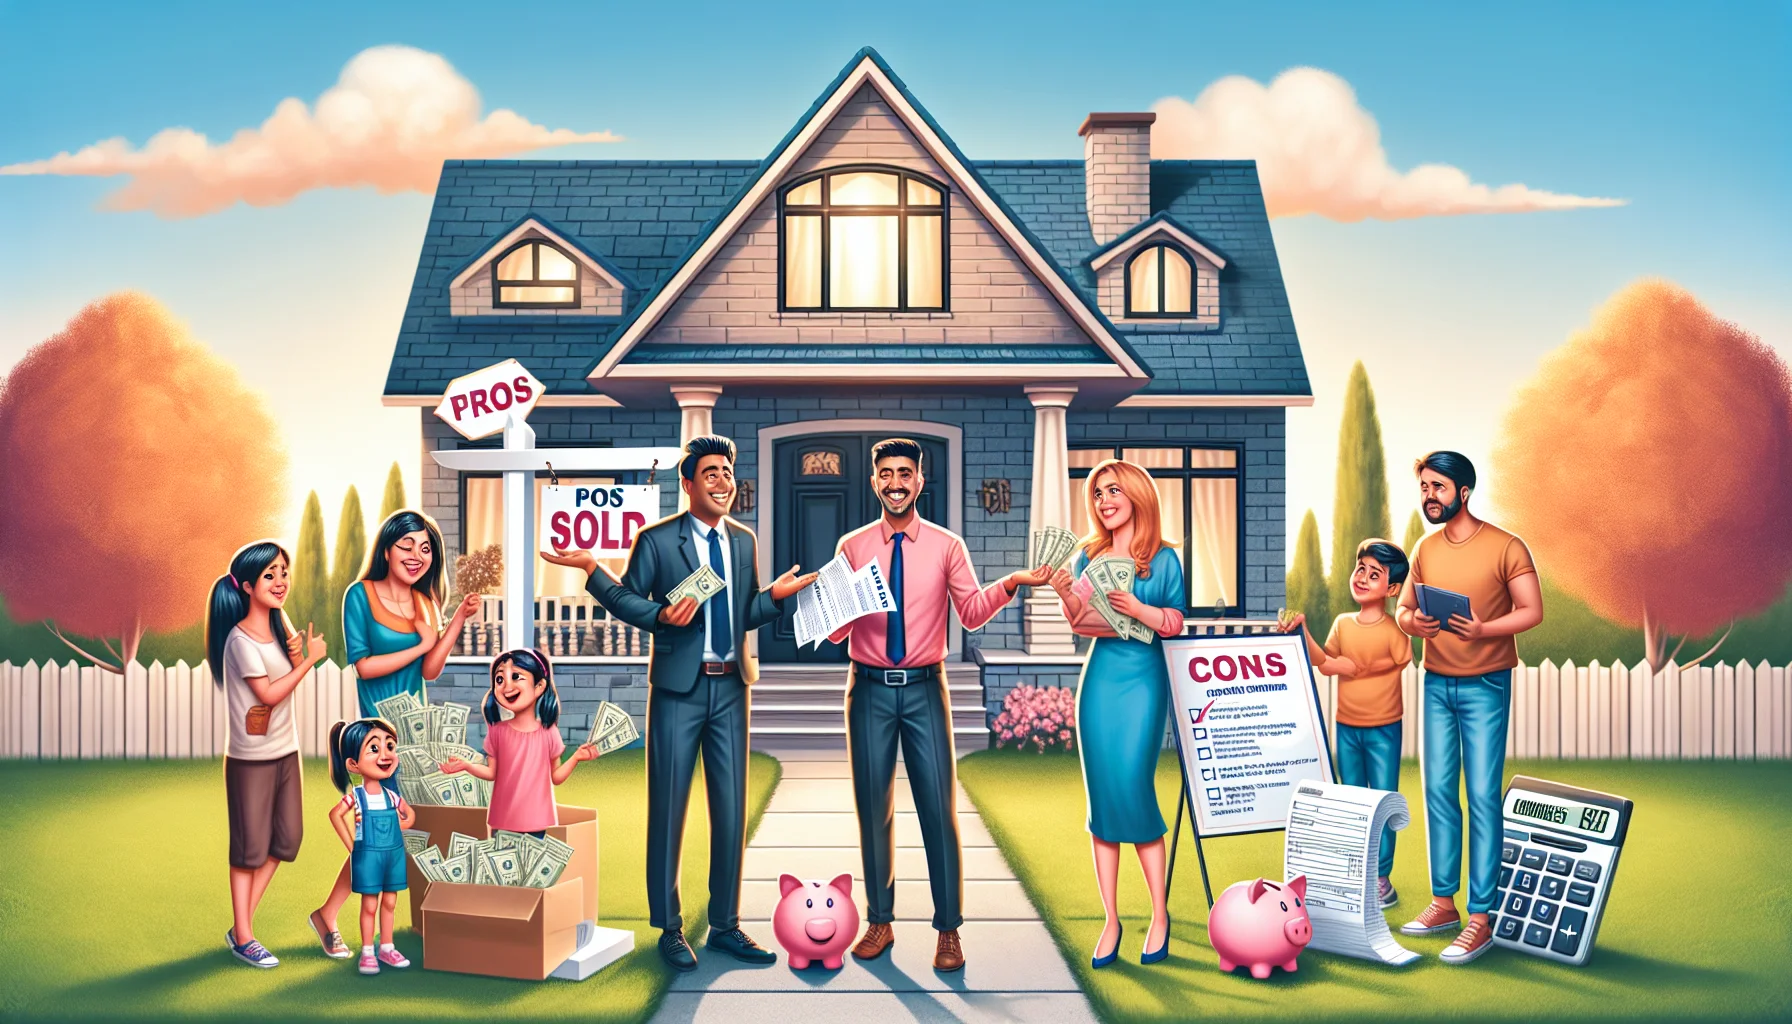 Create a humorous and realistic image that represents the pros and cons of purchasing a house in an ideal real-estate scenario. The 'pros' side of the image could show a South Asian family joyfully standing in front of a beautiful new home with a 'Sold' sign, possibly with the parents handing the keys to each other while small children play in the yard. The 'cons' side may represent a Caucasian man and a Hispanic woman (possibly as home-buyers) perplexed with a stack of paperwork, a calculator showing high numbers, and a piggy bank reflecting monetary investment. Remember to set the scenes in a sunny, charming neighborhood for an ideal real estate scenario.